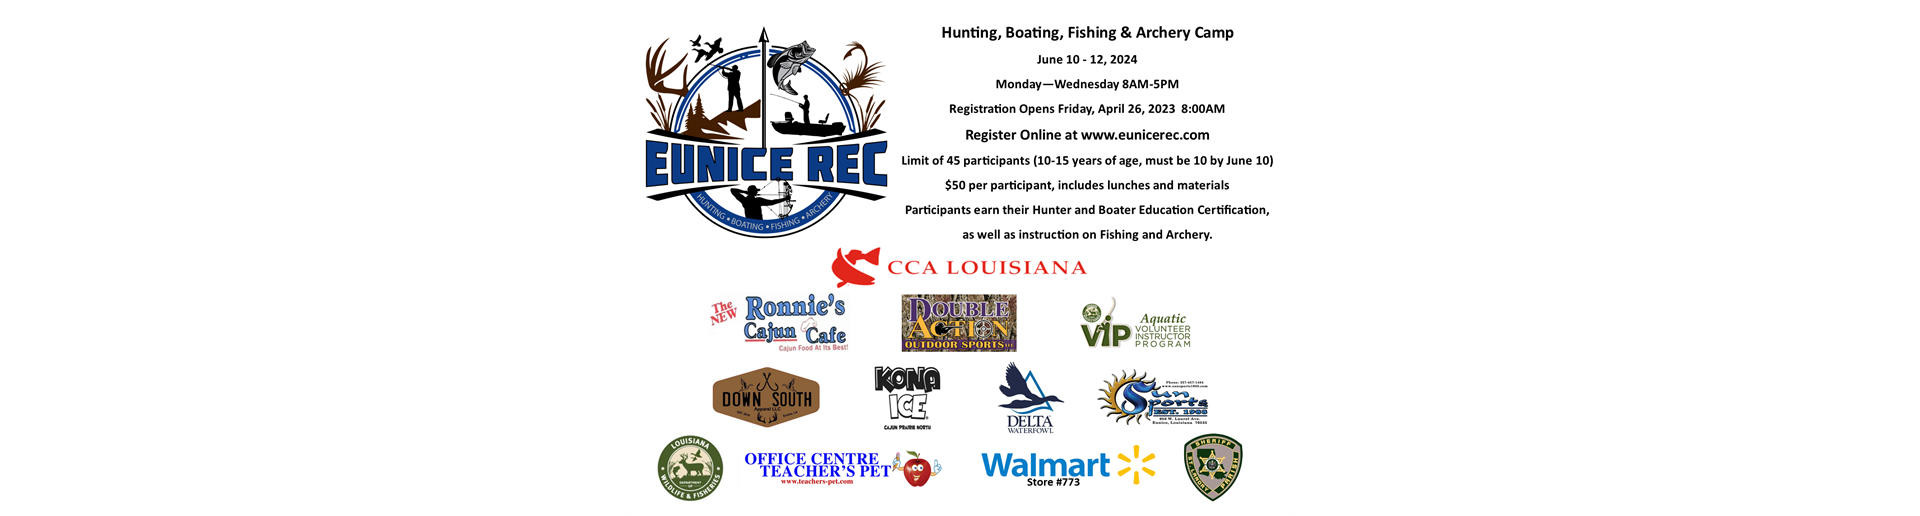 Hunting, Boating, Fishing & Archery Camp